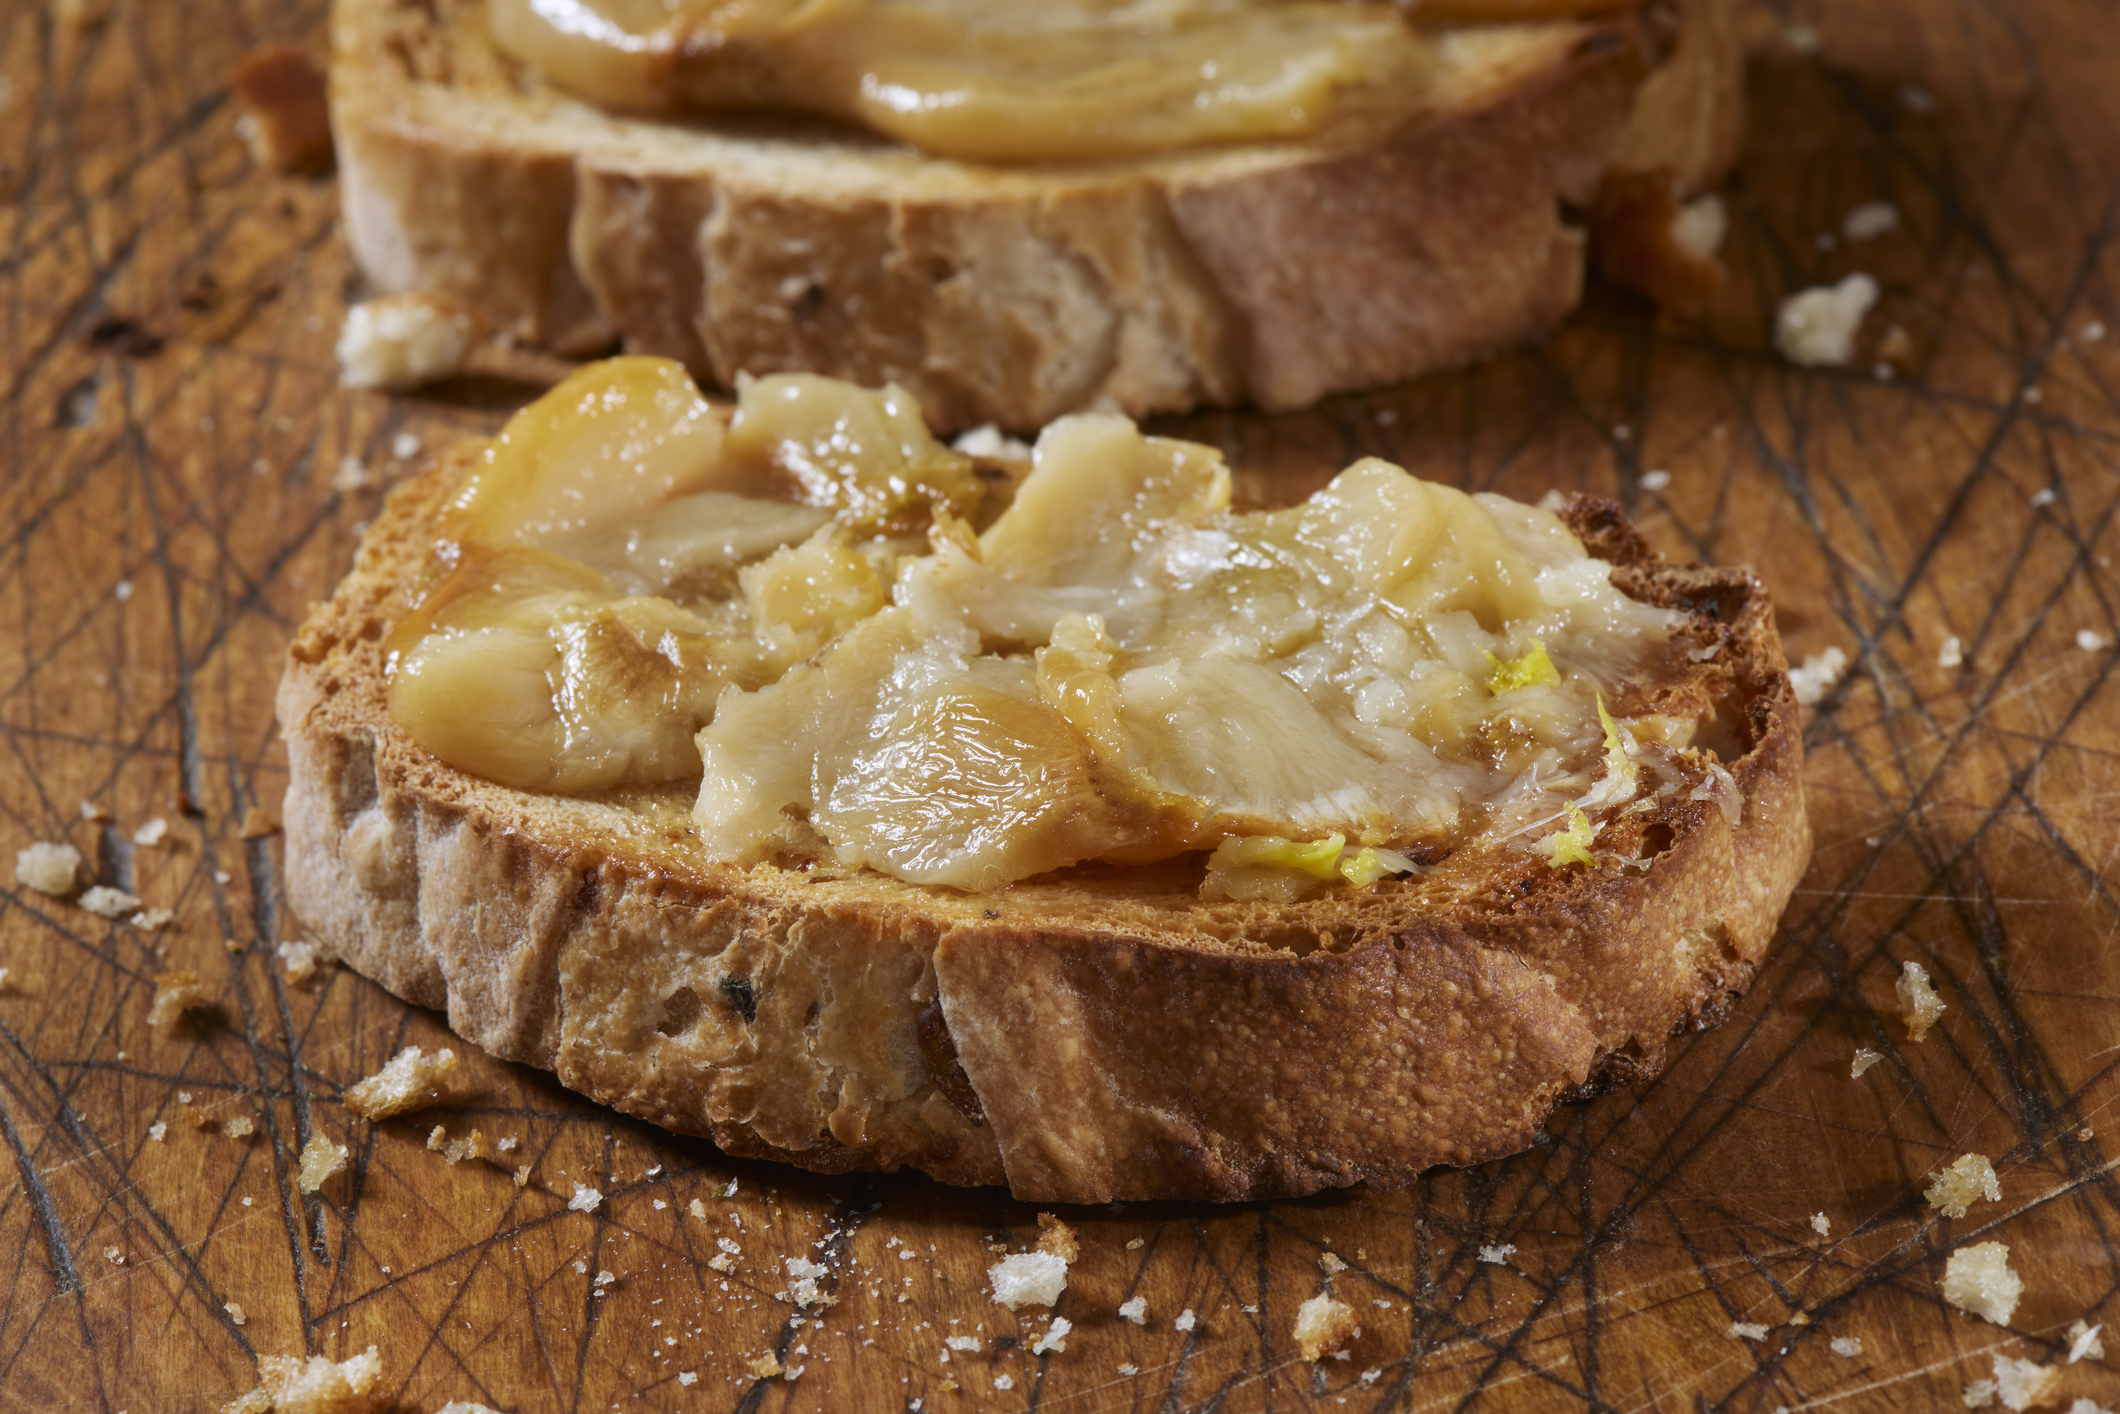 Two slices of toasted bread topped with melted cheese and onions on a wooden surface